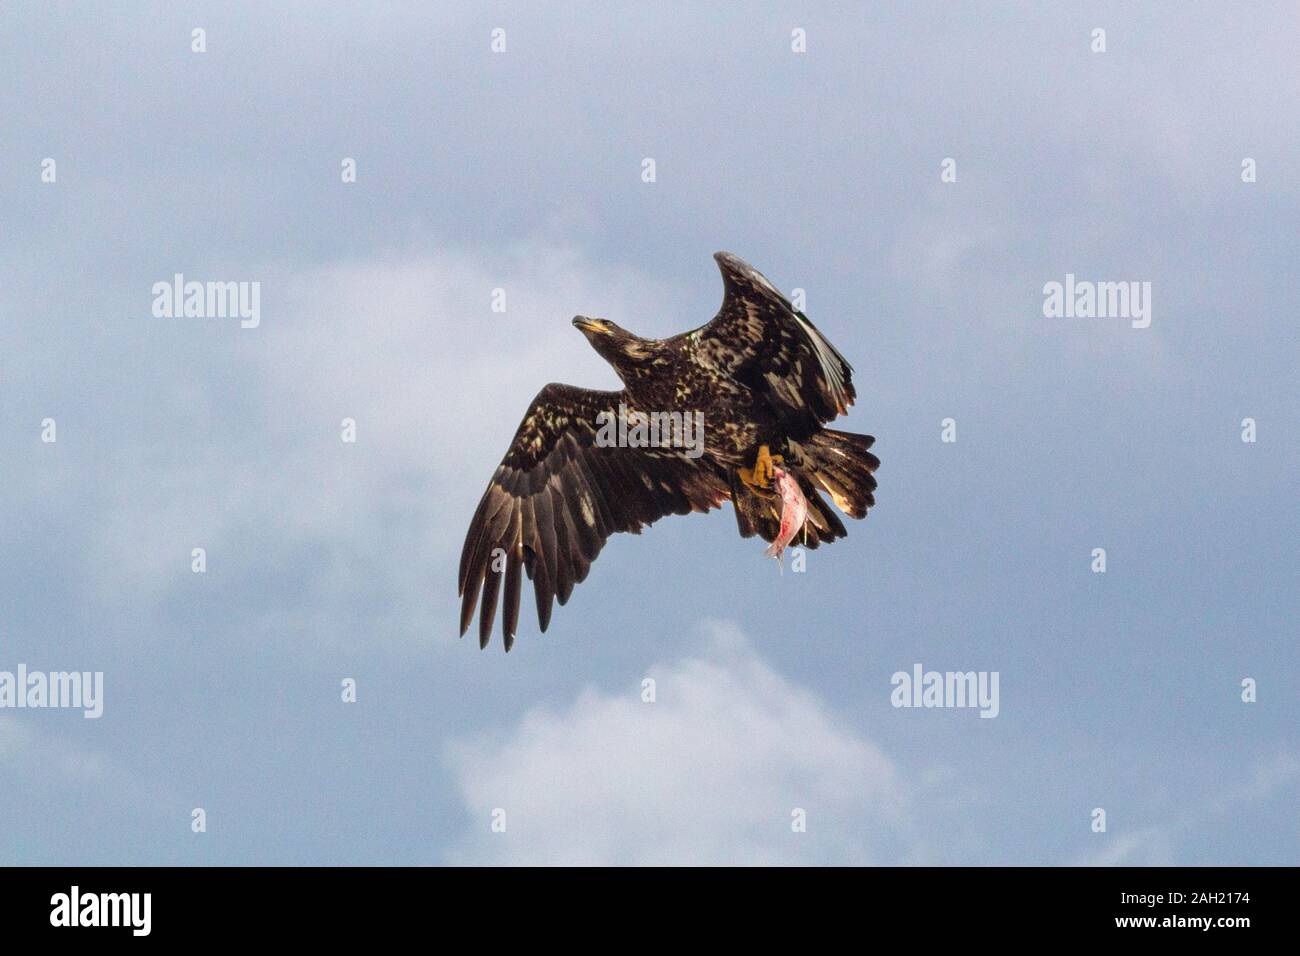 A juvenile bald eagle carrying a fish in its talons. Stock Photo